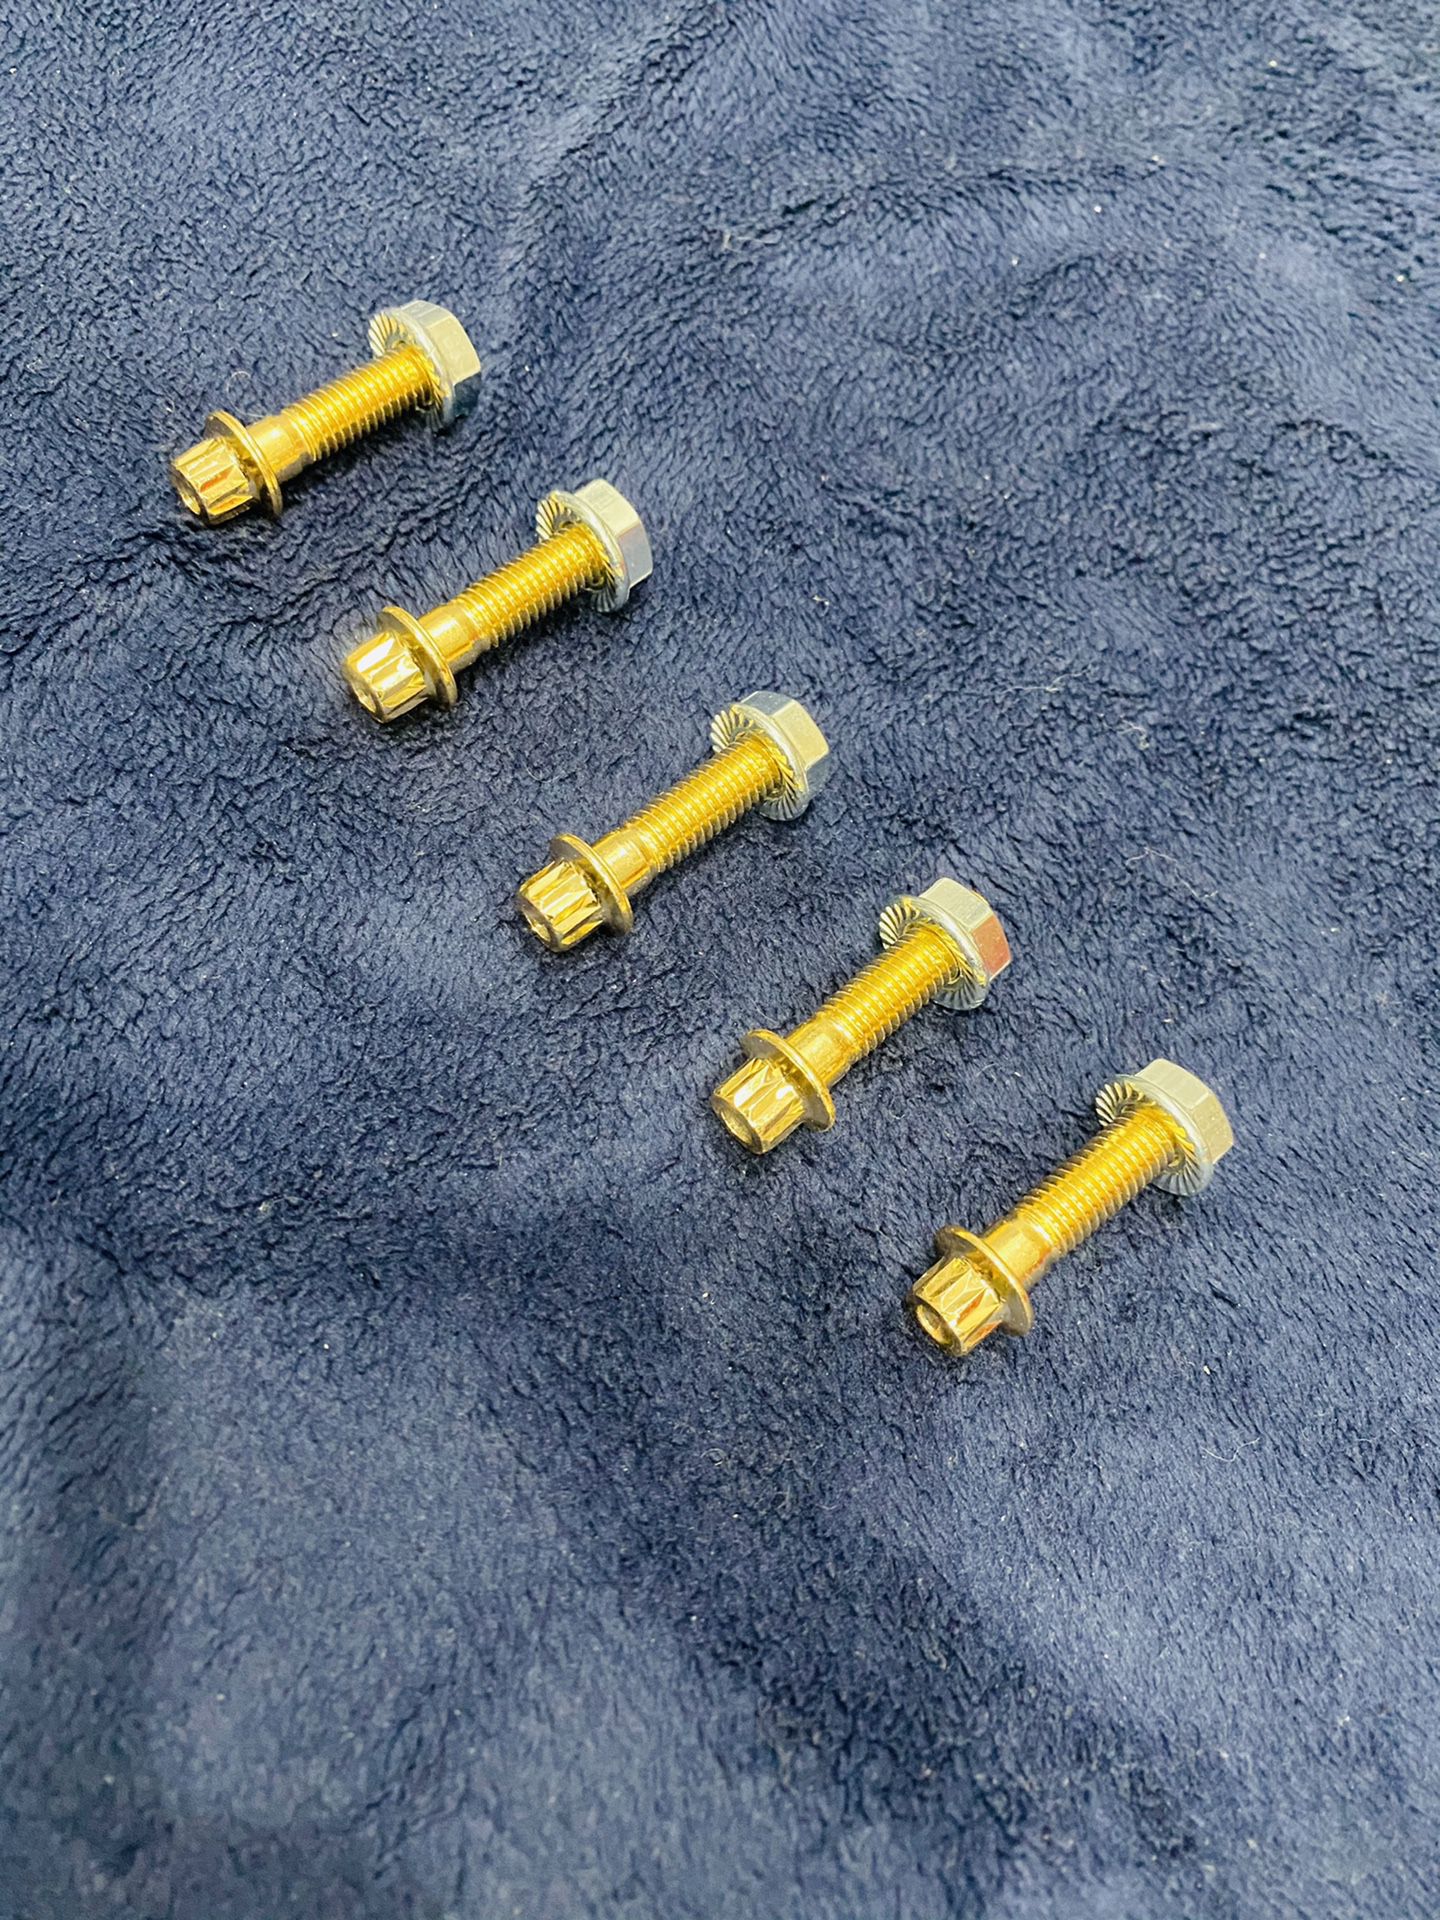 (40) 3 piece rim bolts 12point 8mx1.25 32mm gold black or chrome includes the nuts